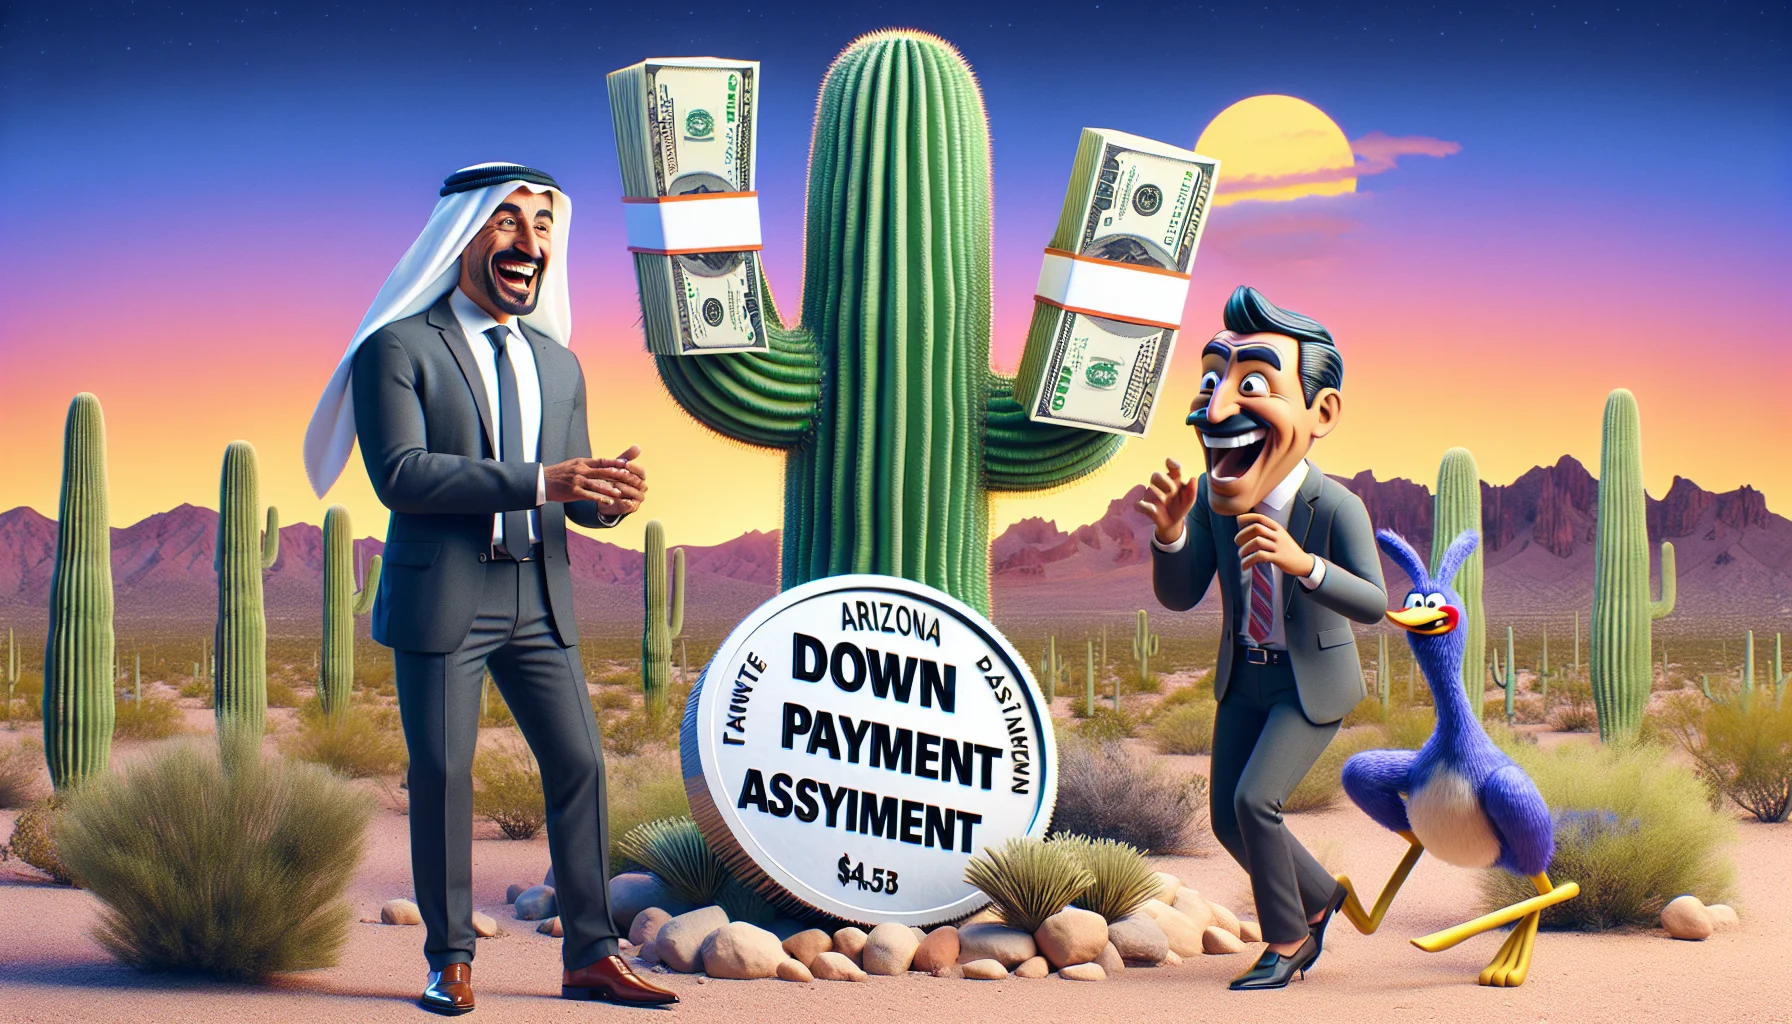 Generate an image displaying a comedic scene related to down payment assistance programs in Arizona. Visualize a couple, one being a Middle-Eastern man, the other an Hispanic woman, both in business attire laughing while standing in front of a massive saguaro cactus. Instead of regular thorns, this cactus has oversized replicas of cash bills sticking out. A roadrunner cartoonishly carrying a gigantic coin labeled 'down payment' is seen hastily running towards them. In the background, there's a stunning Arizona desert sunset. This scene shall represent the amusing and ironical representation of down payment assistance programs.